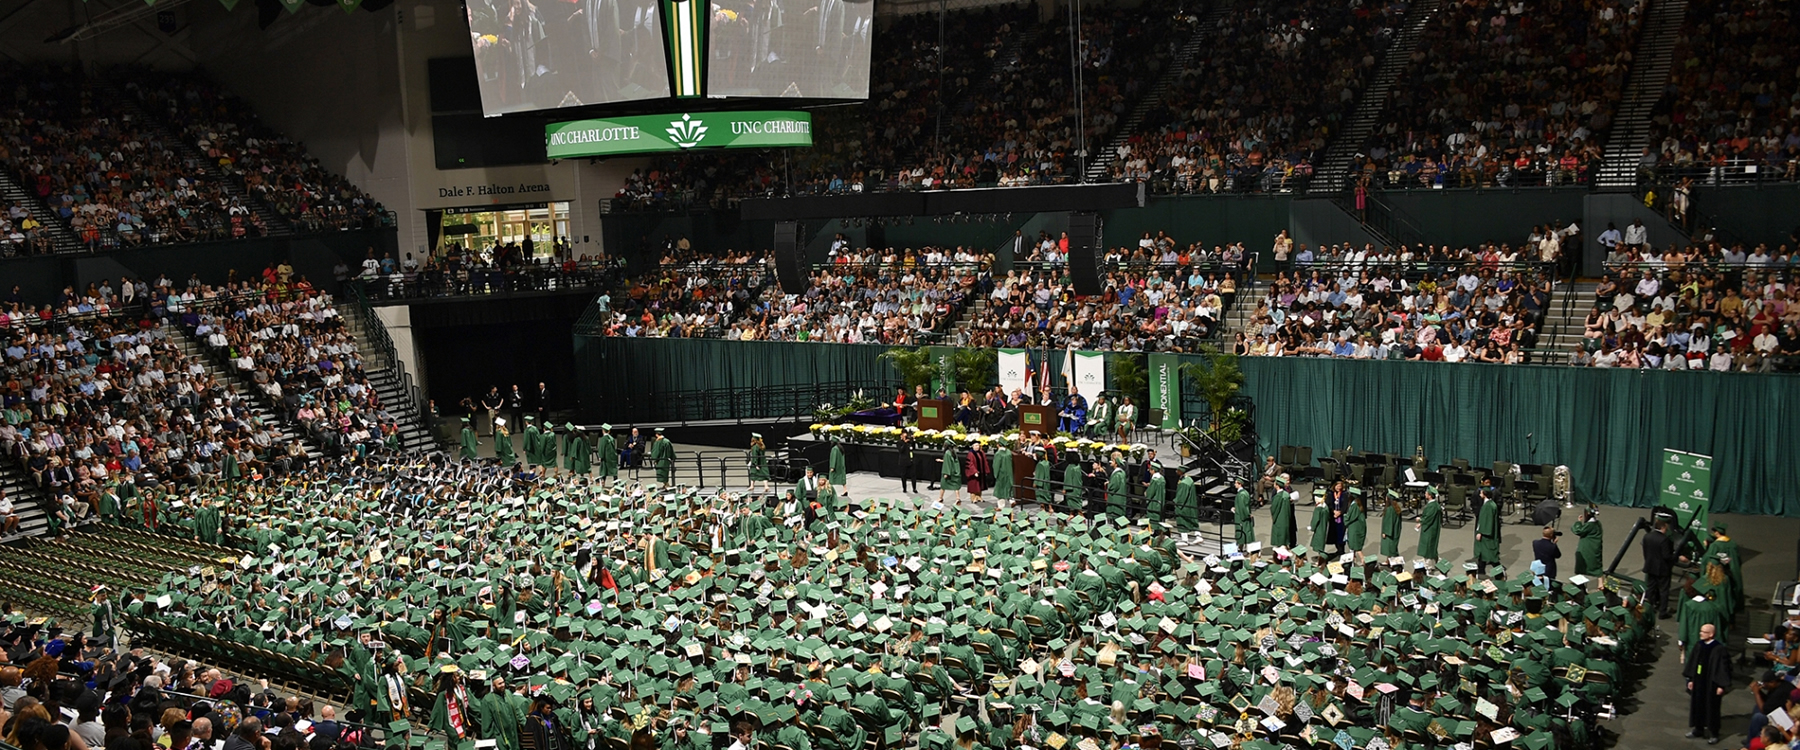 3,800 to receive degrees during Fall Commencement 